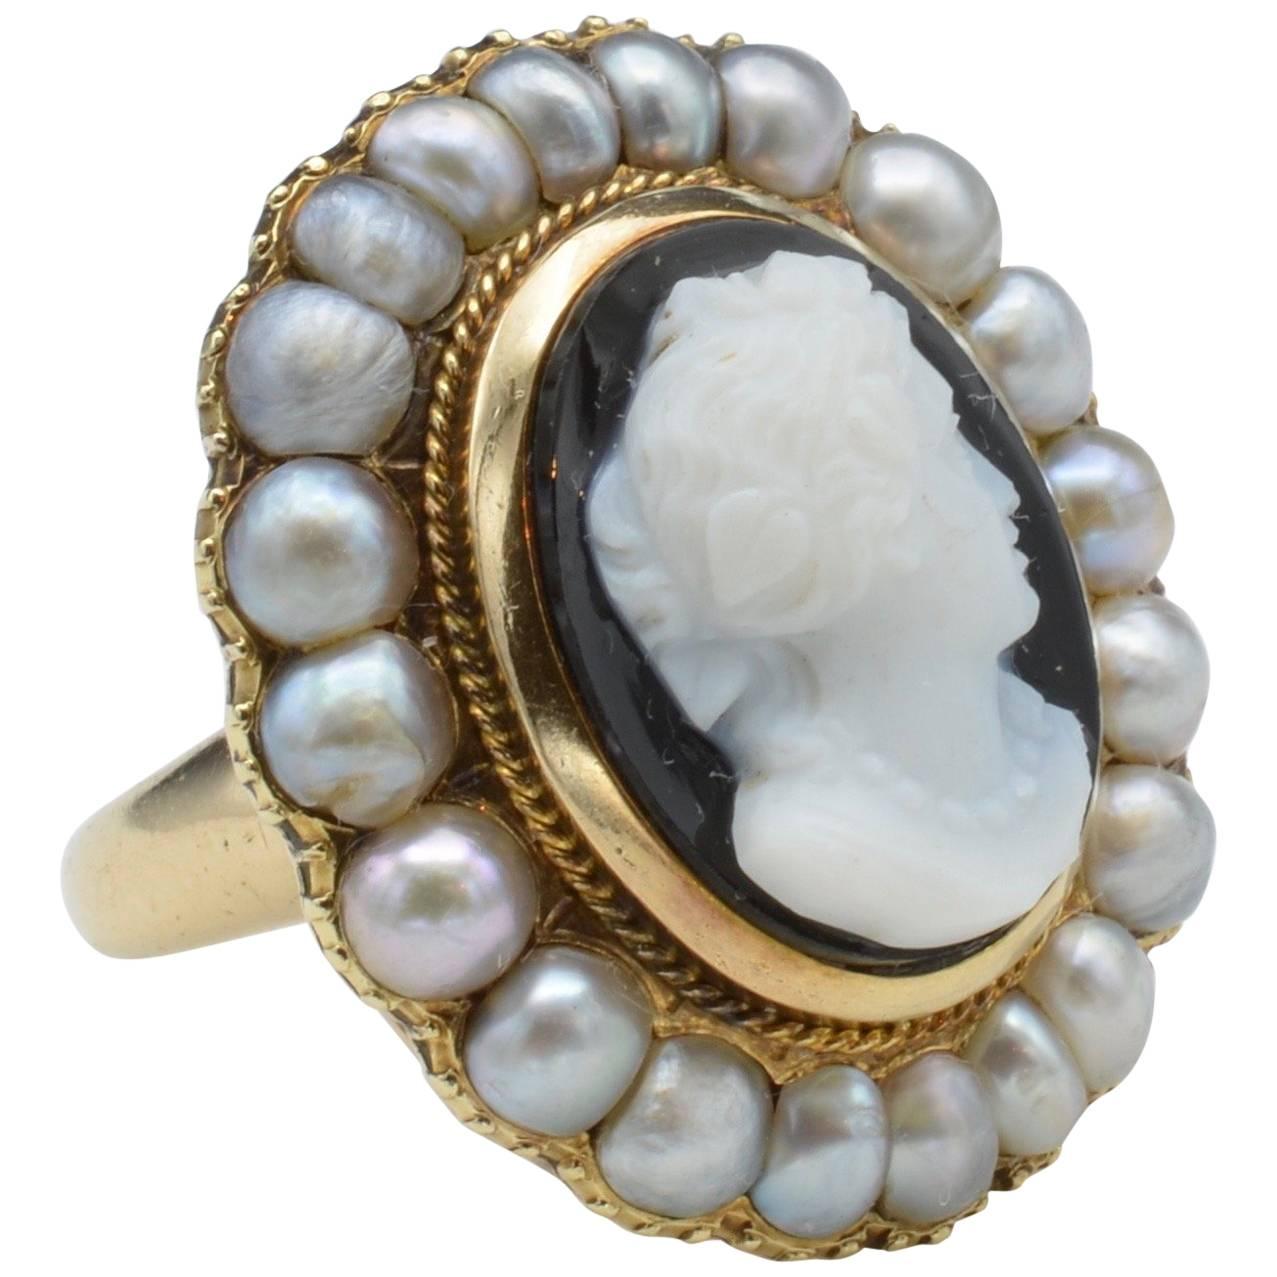 Hand-Carved Onyx Cameo Ring with Pearl Halo from Napoleon III in 18 Karat Gold